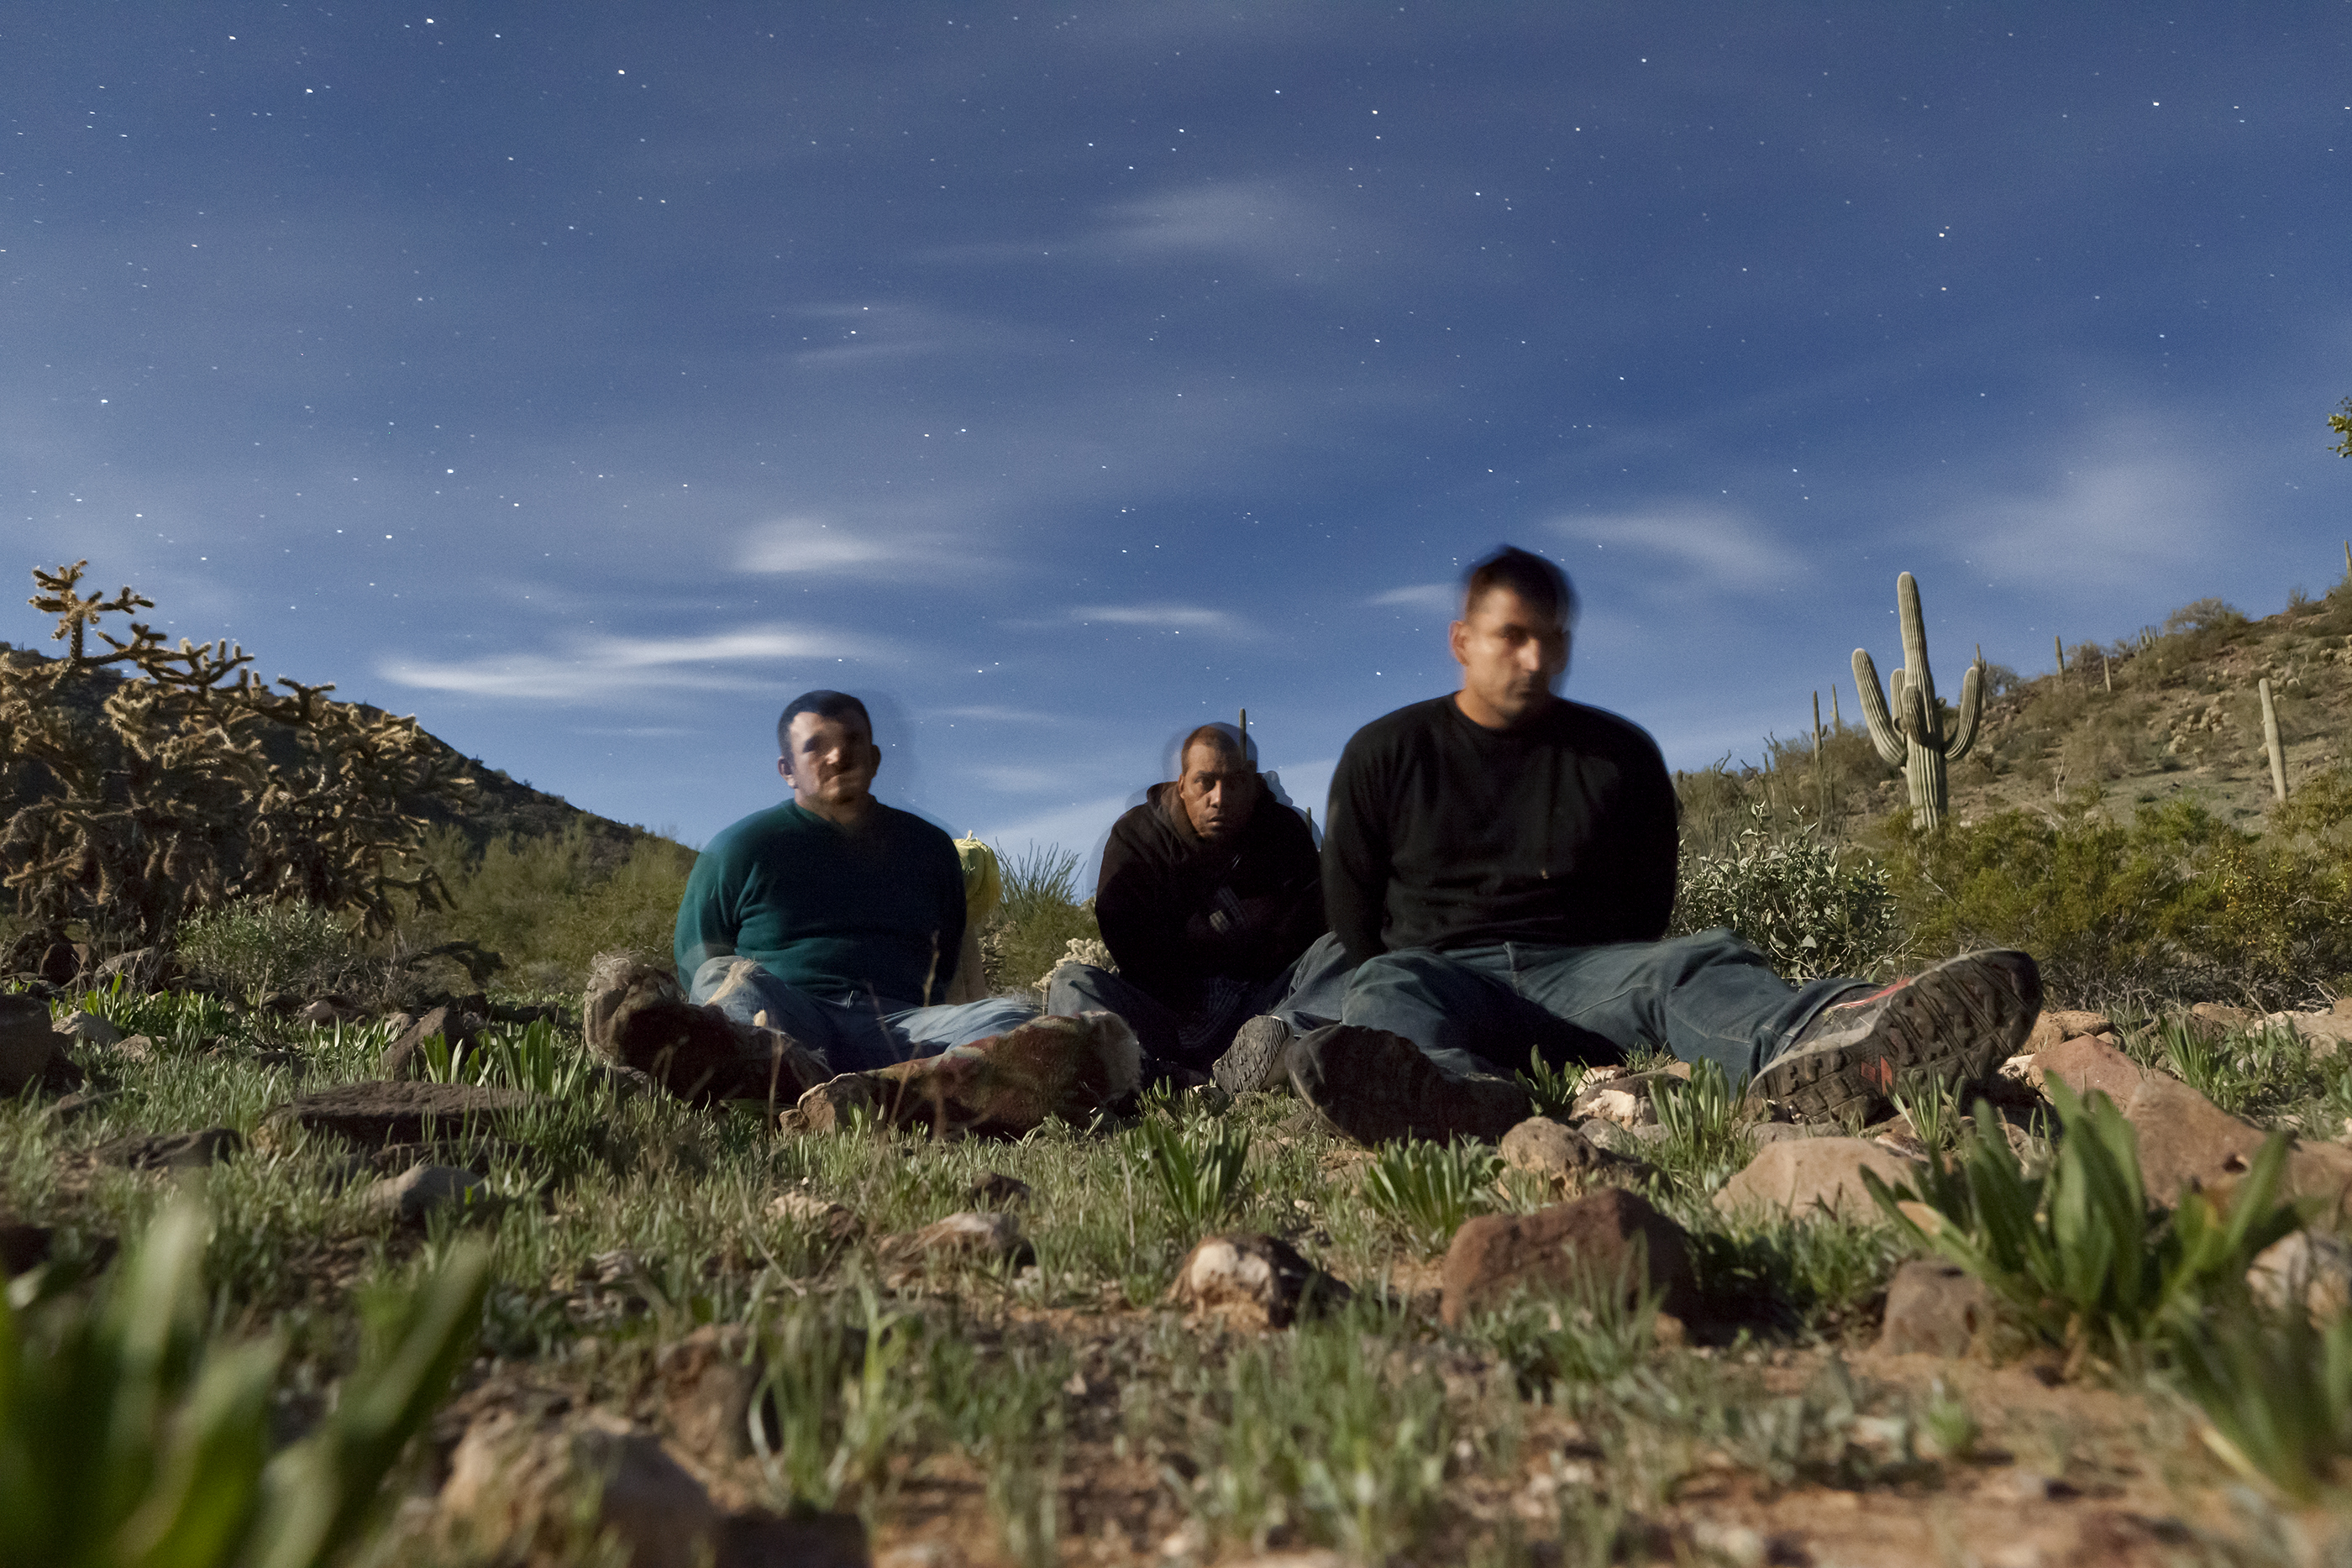 Three migrants apprehended by border patrol posed for this 30-second exposure. (David Taylor) 